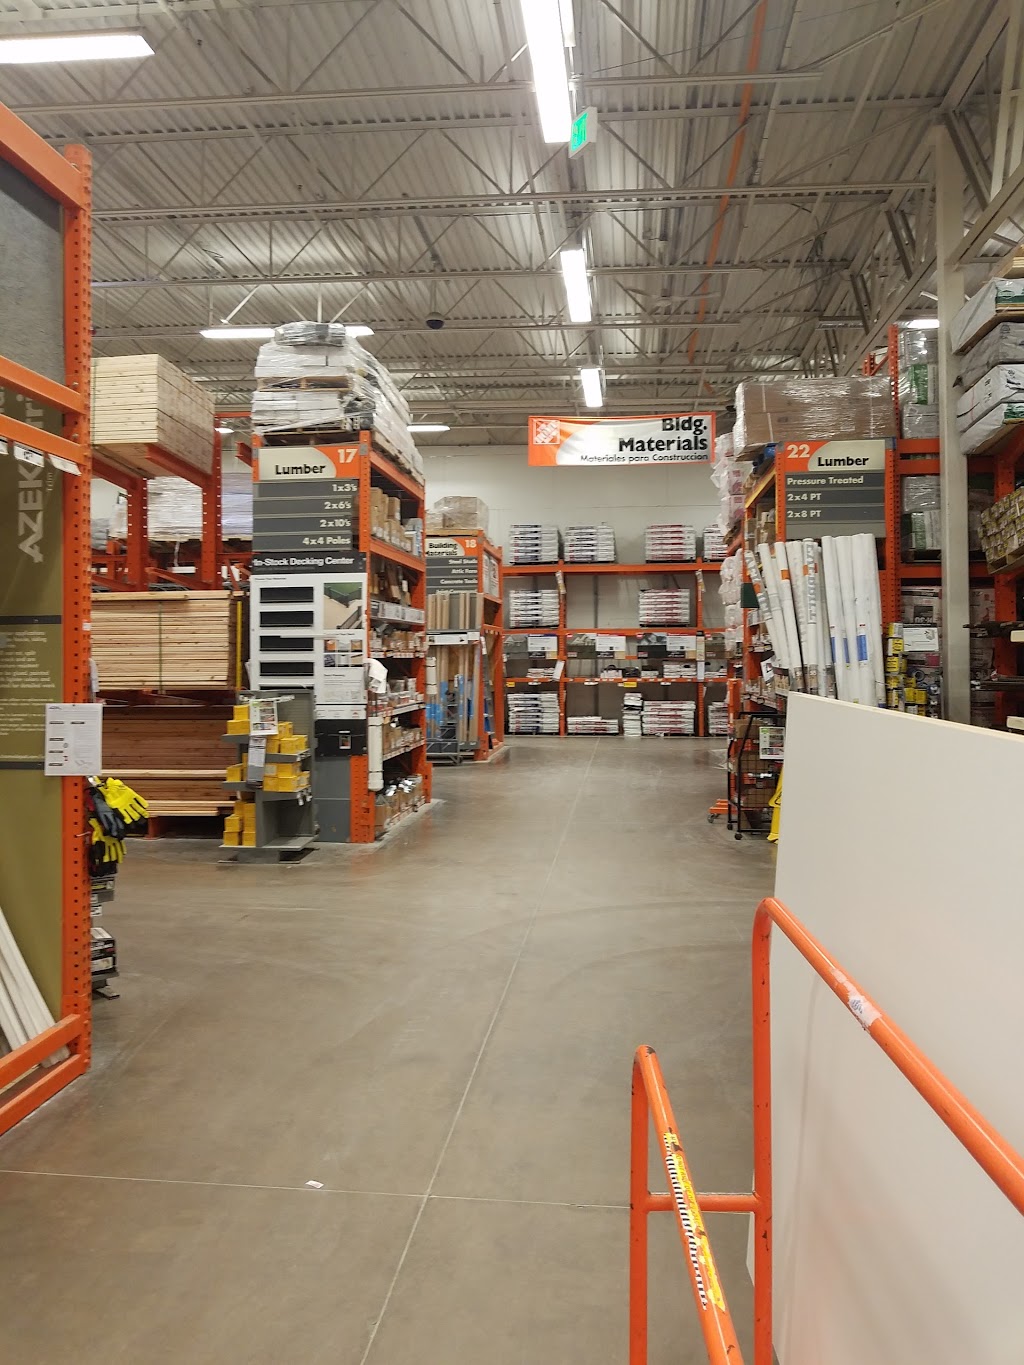 The Home Depot | 68 Thompson Square, Monticello, NY 12701 | Phone: (845) 794-2498